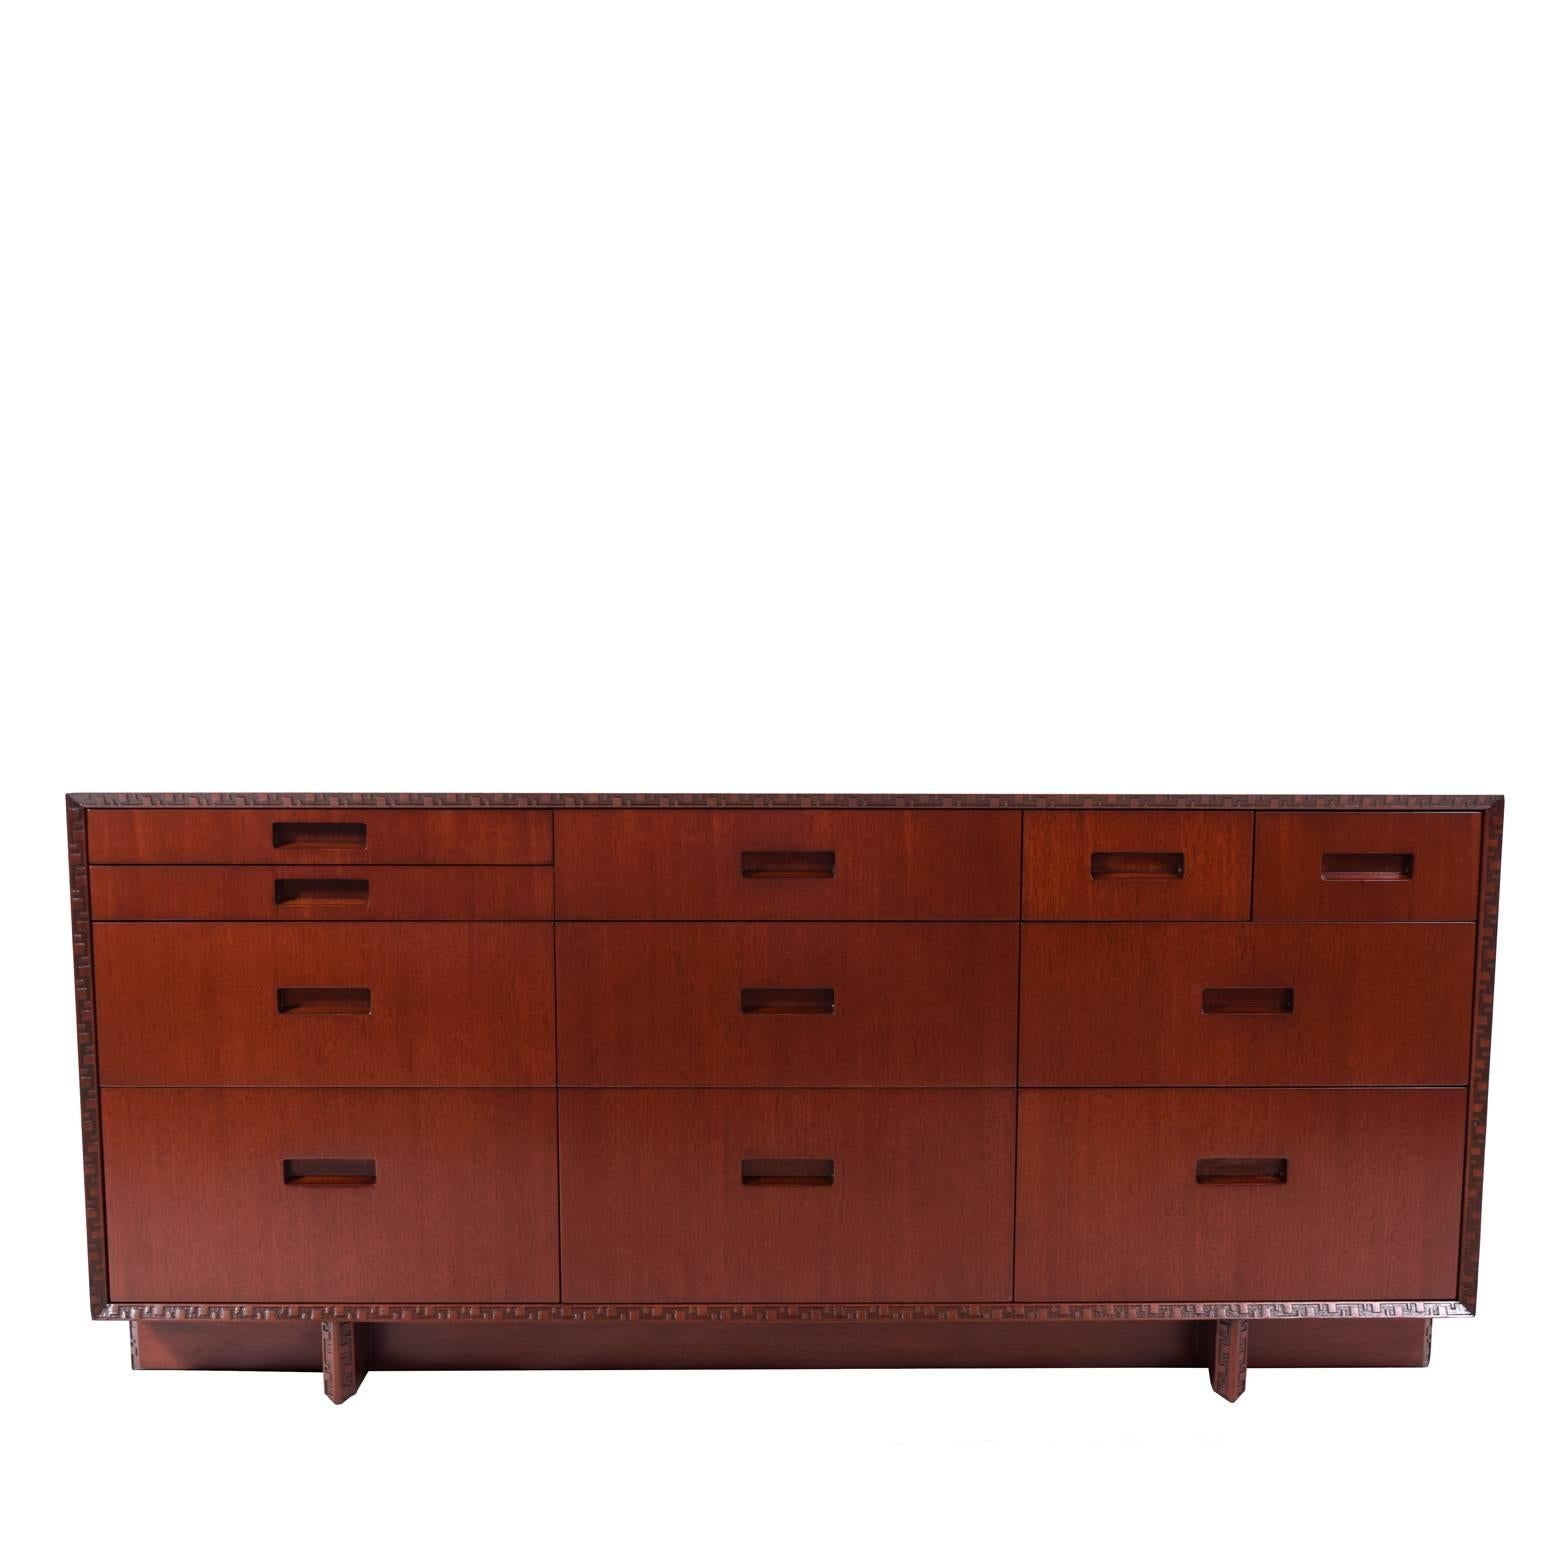 Mahogany chest with 11 drawers of varying sizes and removable shelf to top.
Taliesin design on edges. Crossed plank base.
Marked on back. Made by Heritage Henredon.
Measurements below without shelf.